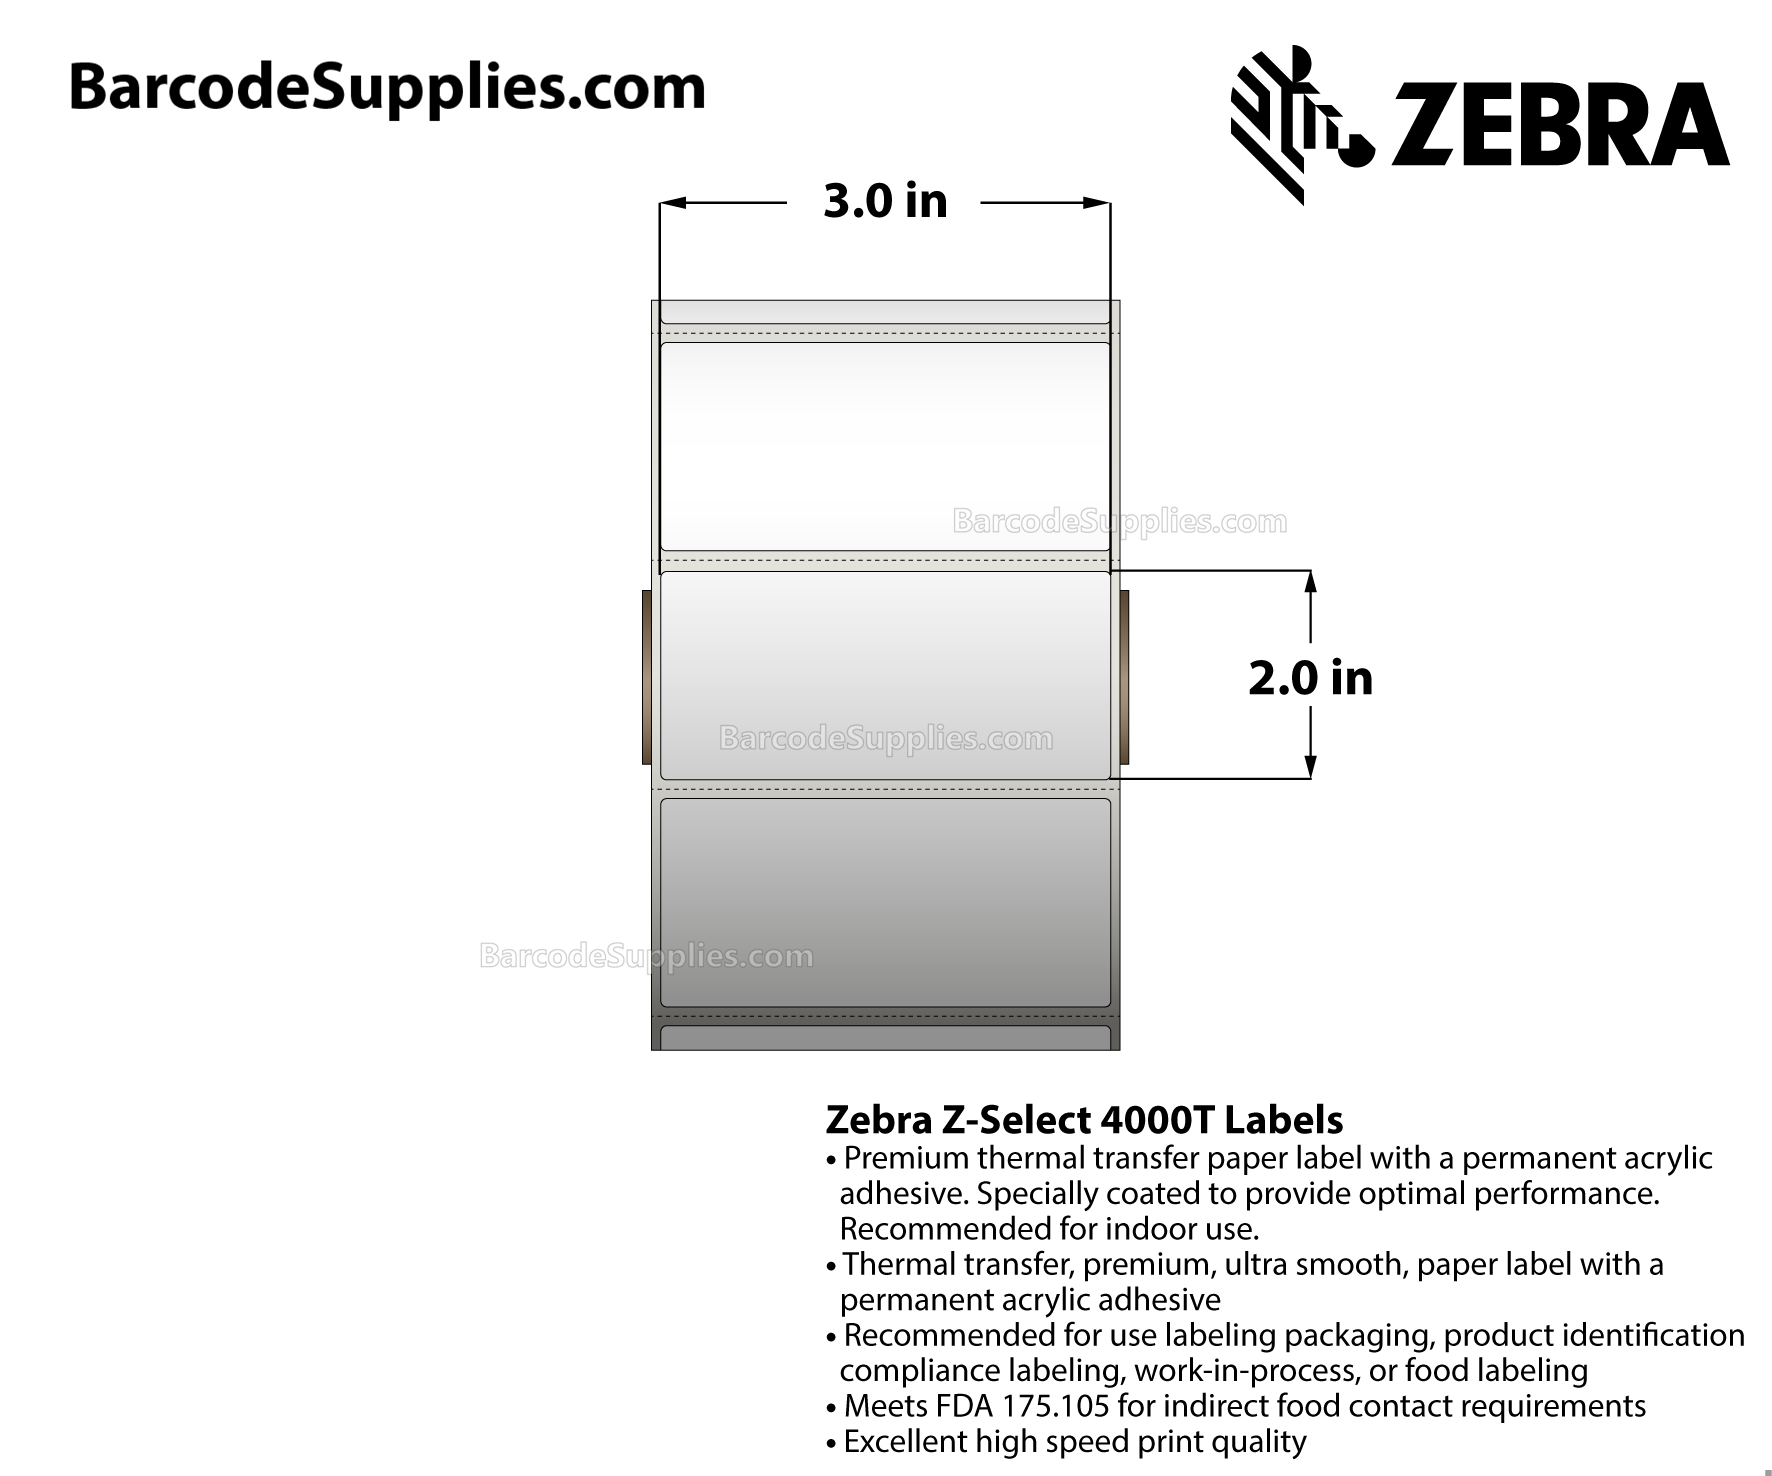 3 x 2 Thermal Transfer White Z-Select 4000T Labels With Permanent Adhesive - Perforated - 1370 Labels Per Roll - Carton Of 6 Rolls - 8220 Labels Total - MPN: 10009529